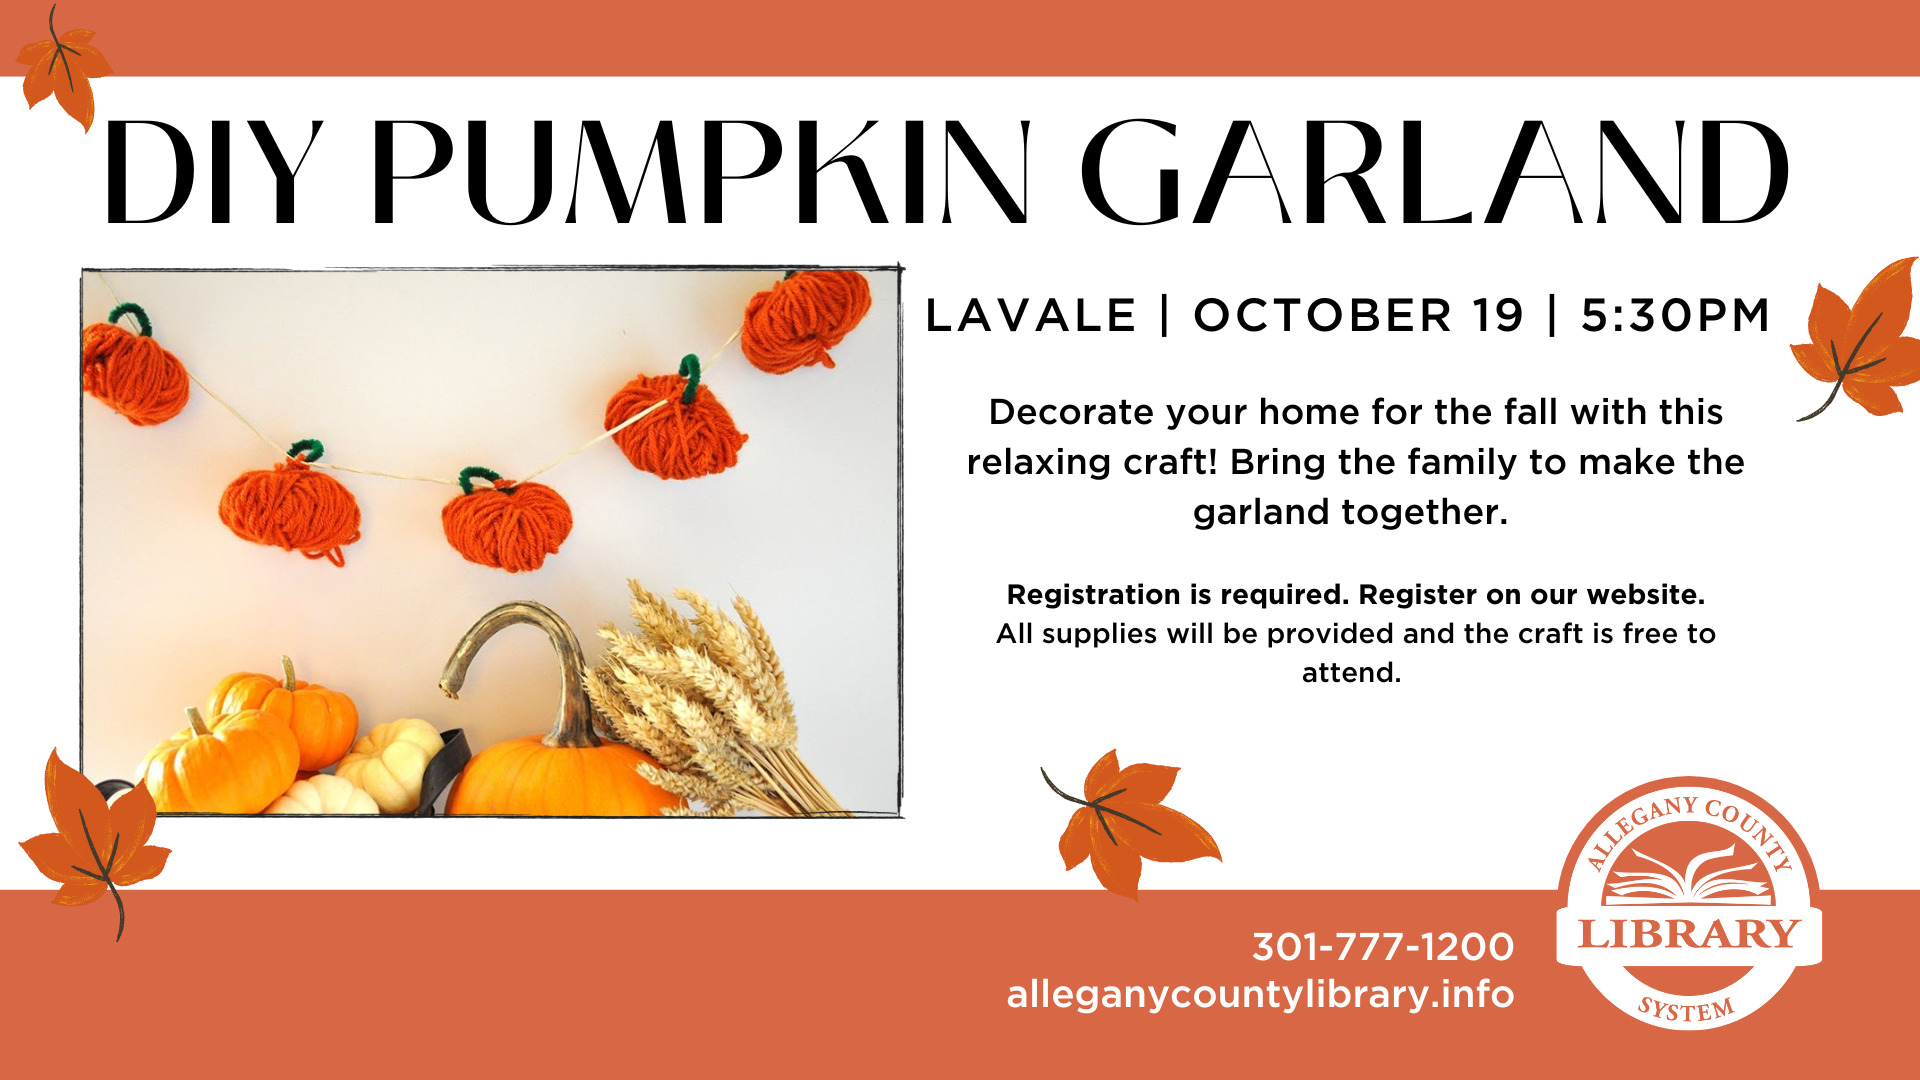 garland with yarn pumpkins on it. event details listed beside.